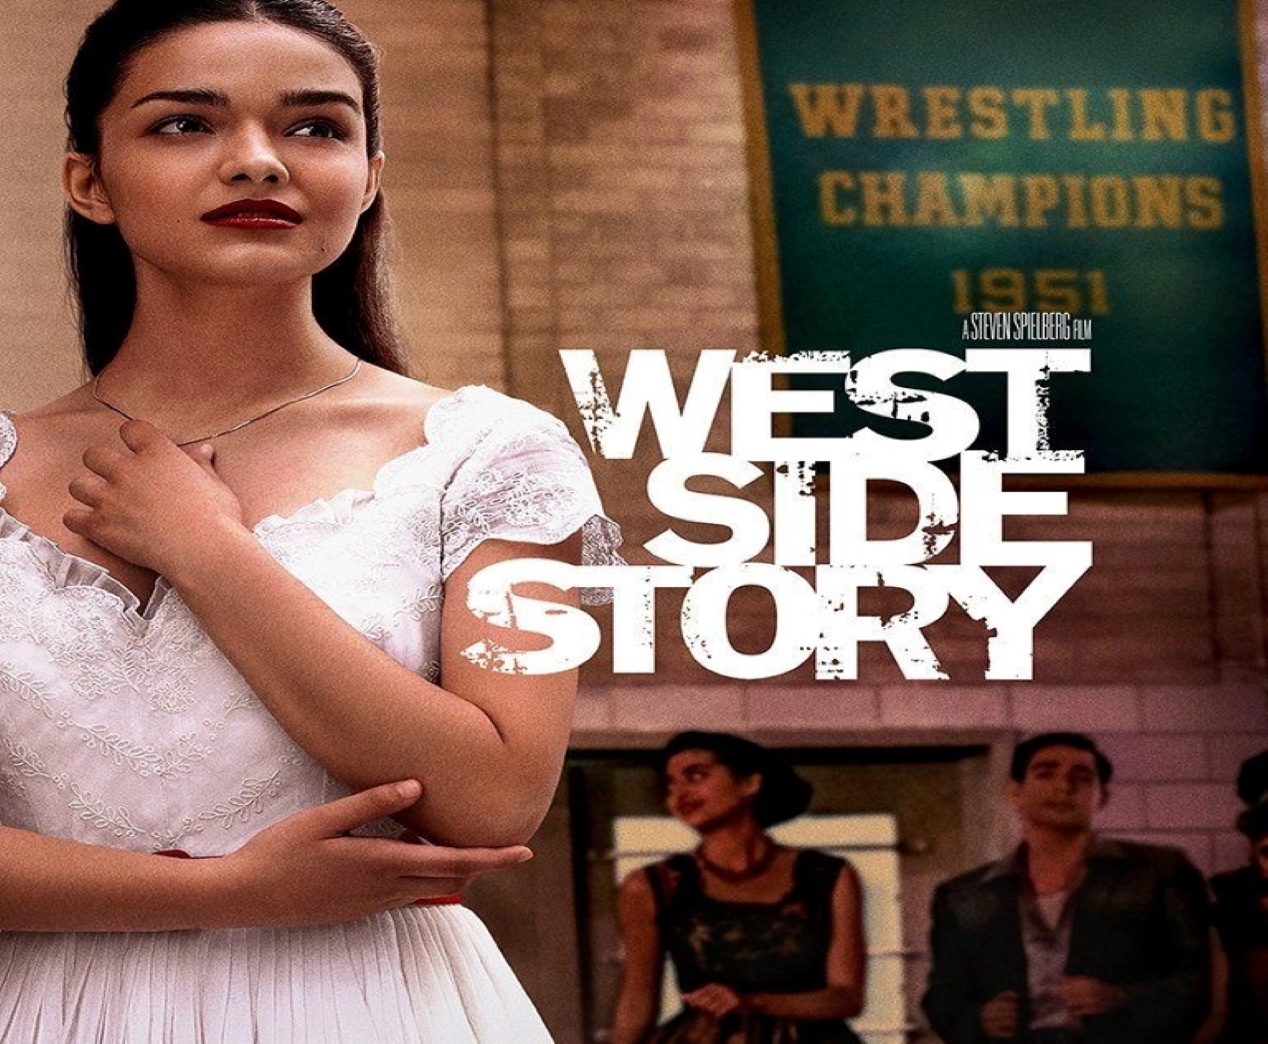 West Side Story (2021): Download West Side Story Full Movie in HD from Tamilrockers